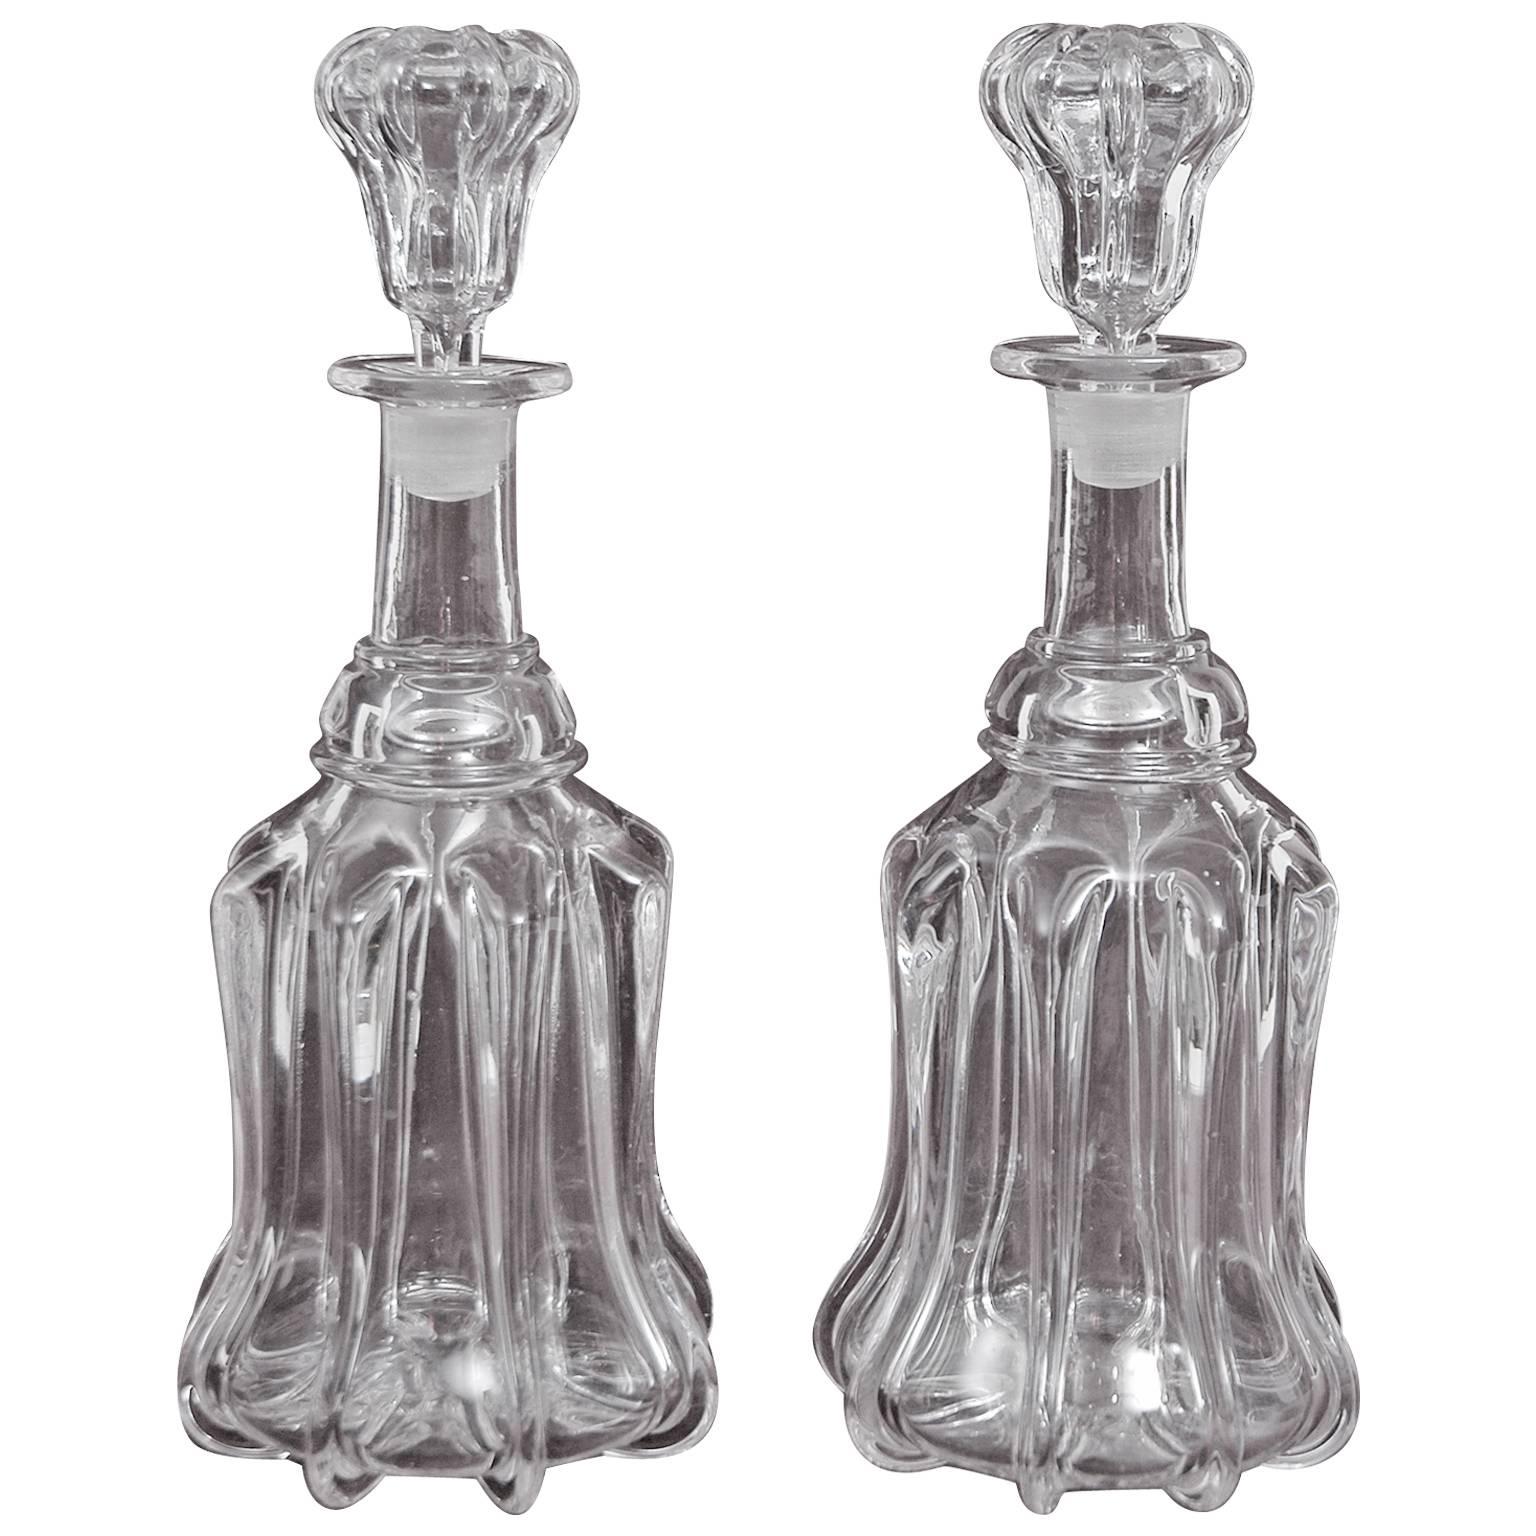 Pair of 18th Century English Port and Sherry Decanters